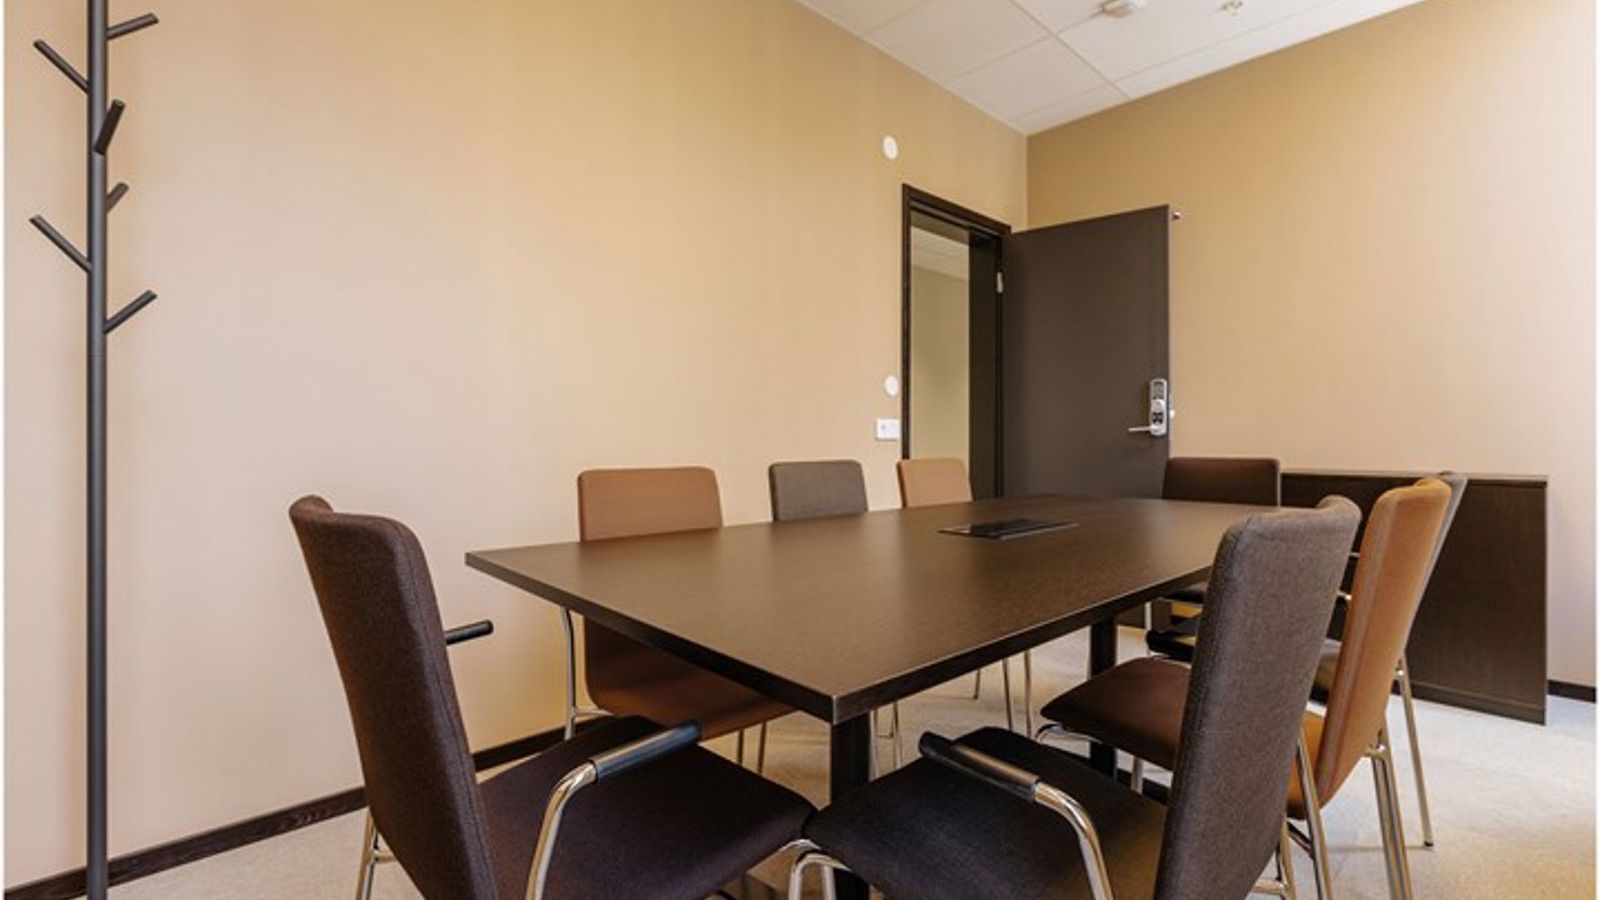 Conference room with board seating in brown tones